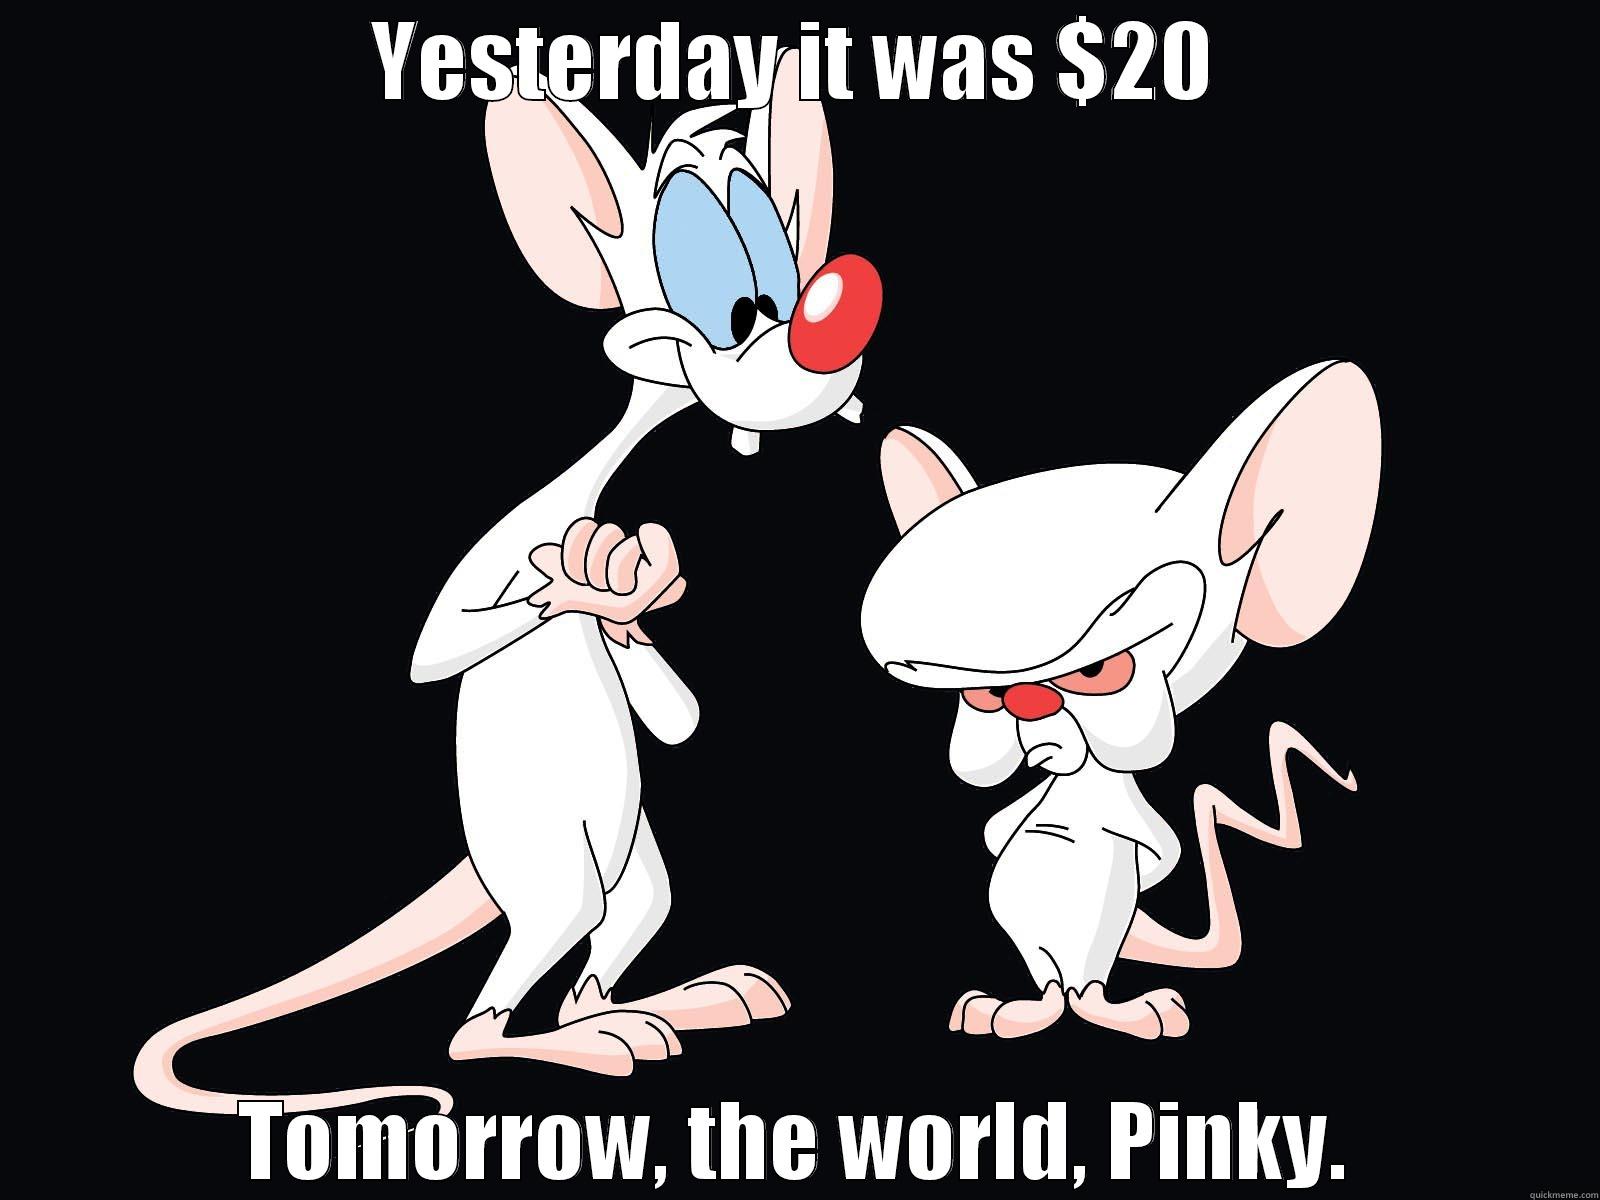 YESTERDAY IT WAS $20 TOMORROW, THE WORLD, PINKY. Misc